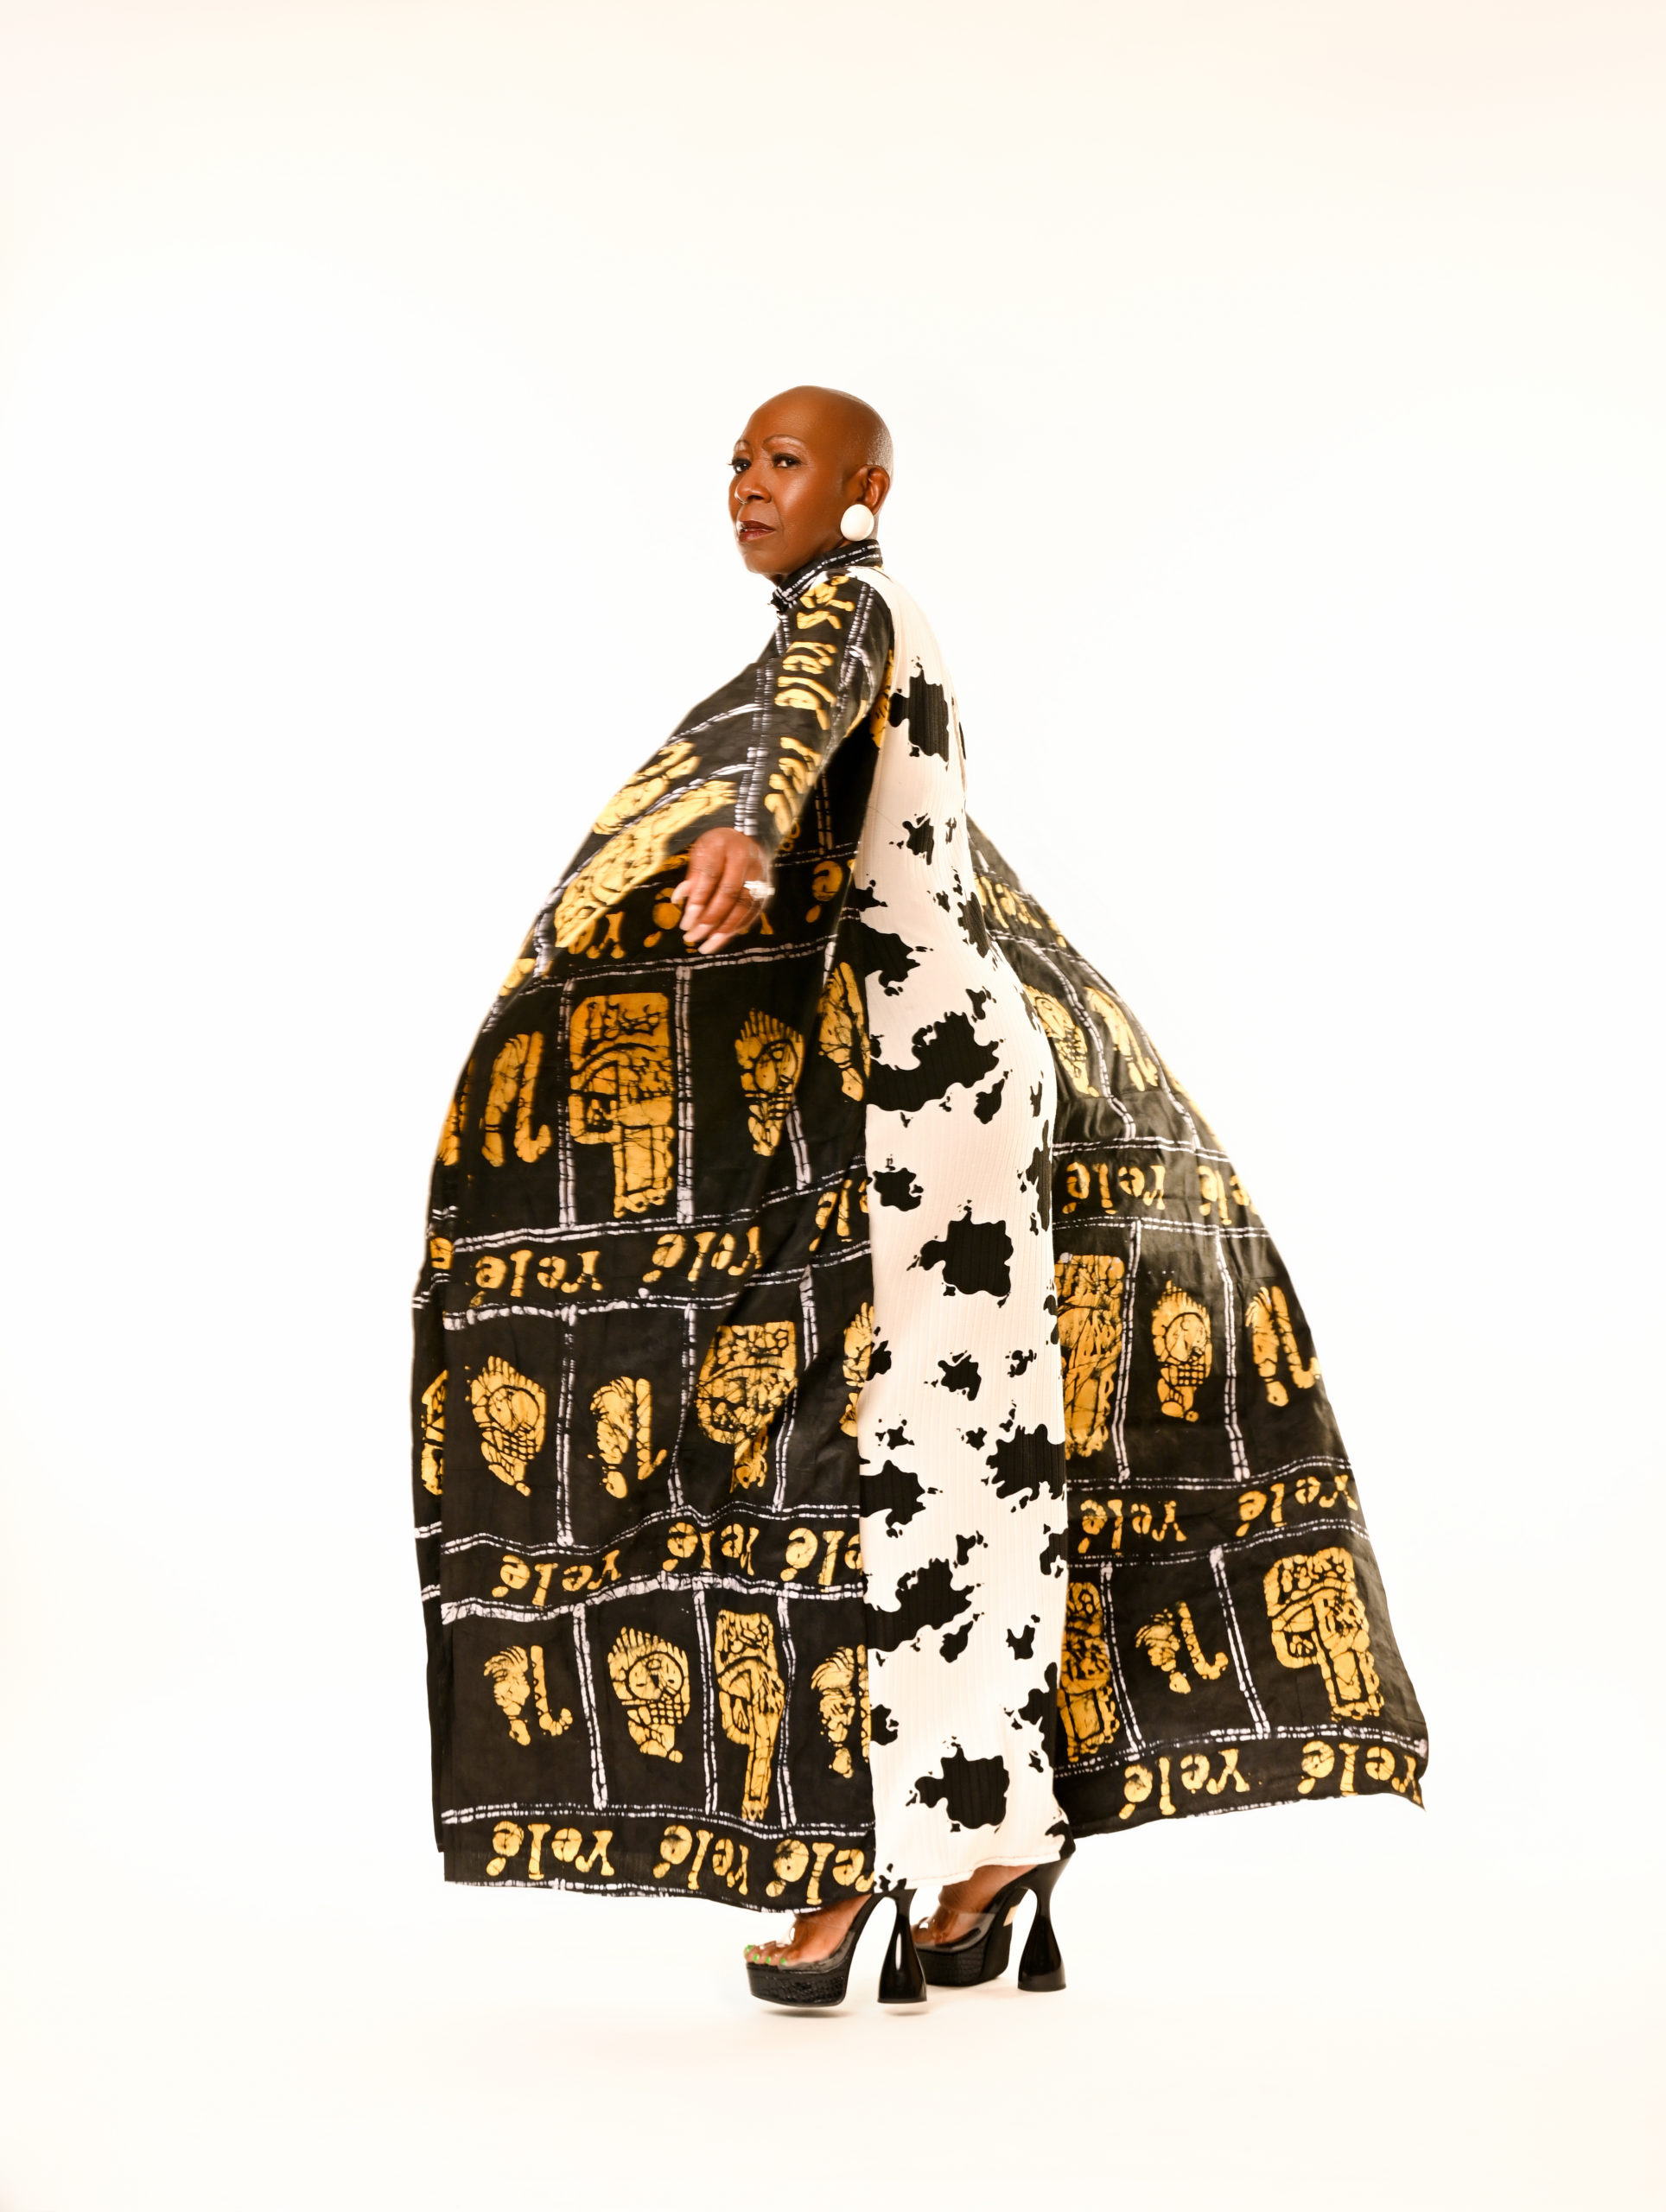 HOME - Luxury African Print Clothing